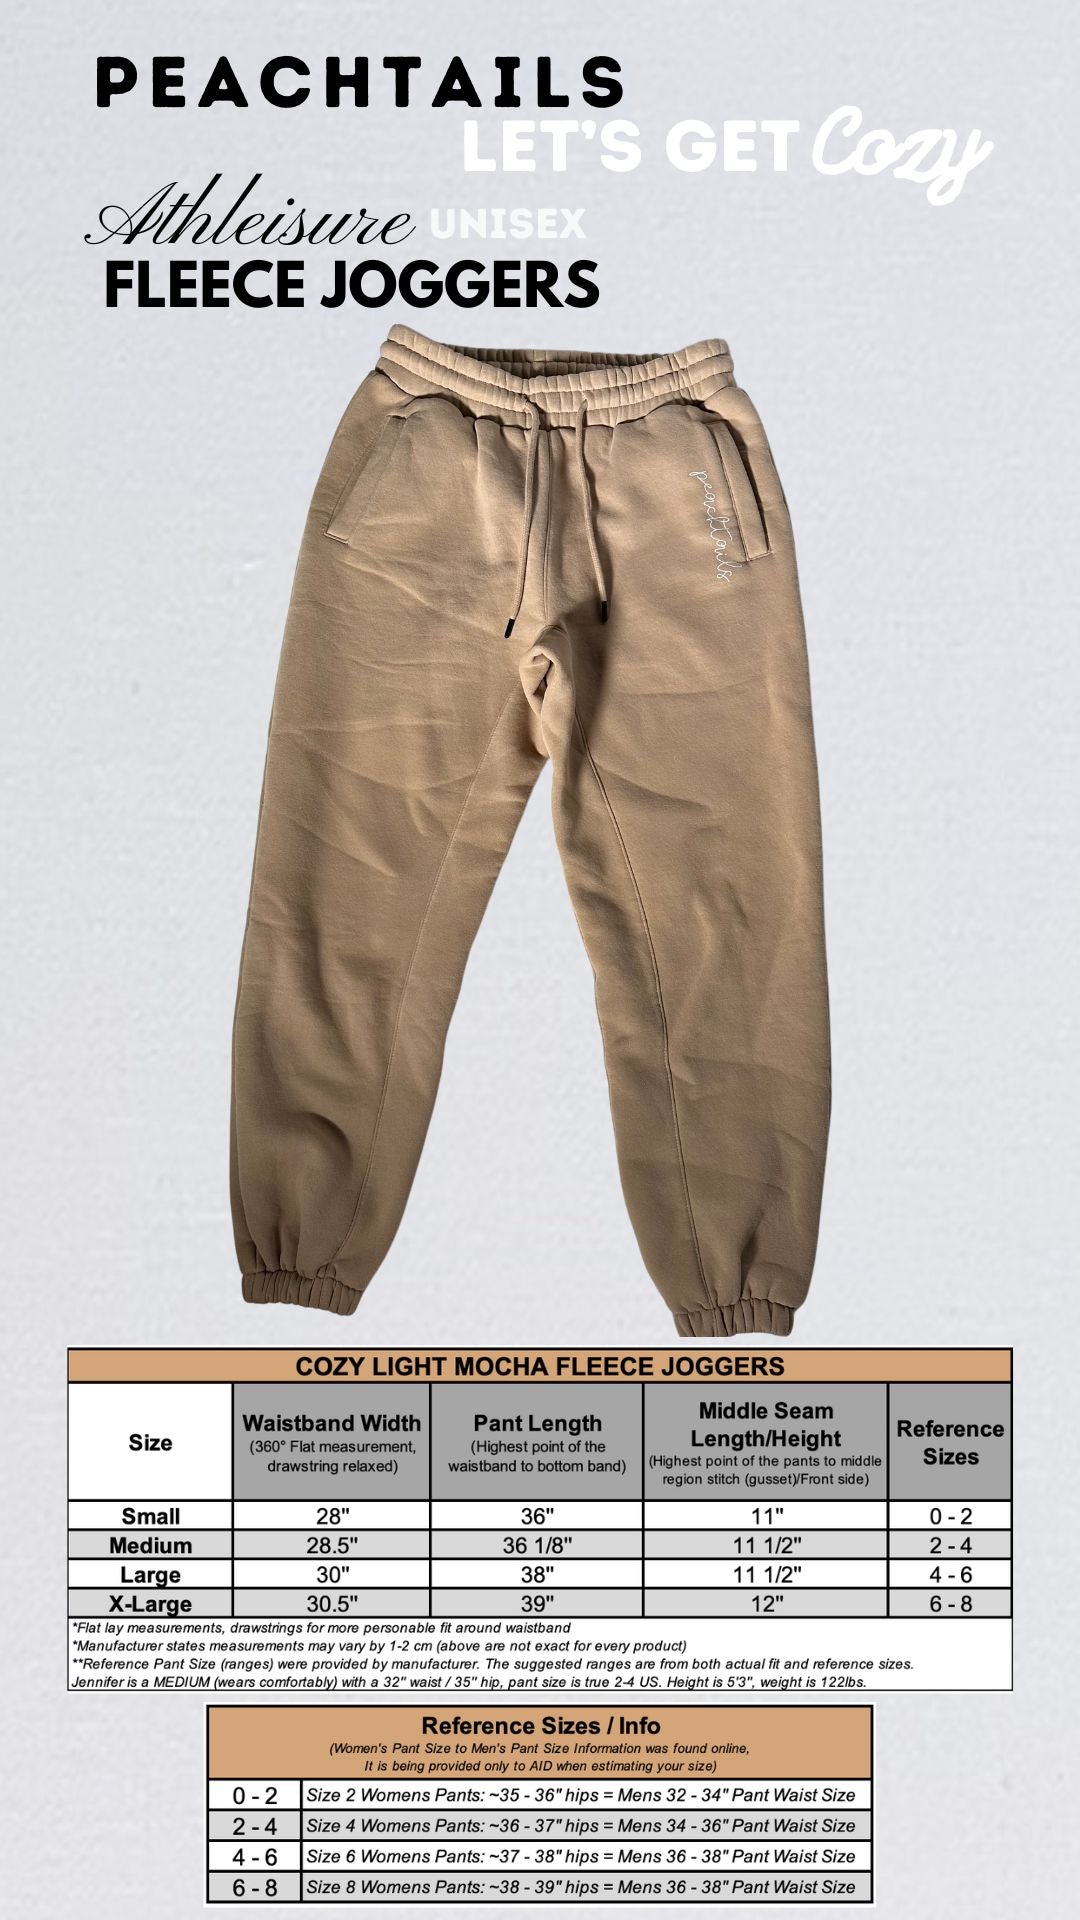 The image is a promotional graphic for Peachtails Athleisure Unisex Fleece Joggers, captioned "Let's Get Cozy." It showcases a pair of light mocha fleece joggers. Below the image is a sizing chart detailing waistband width, pant length, and middle seam length for sizes small to x-large, with a reference size guide ranging from 0-8.